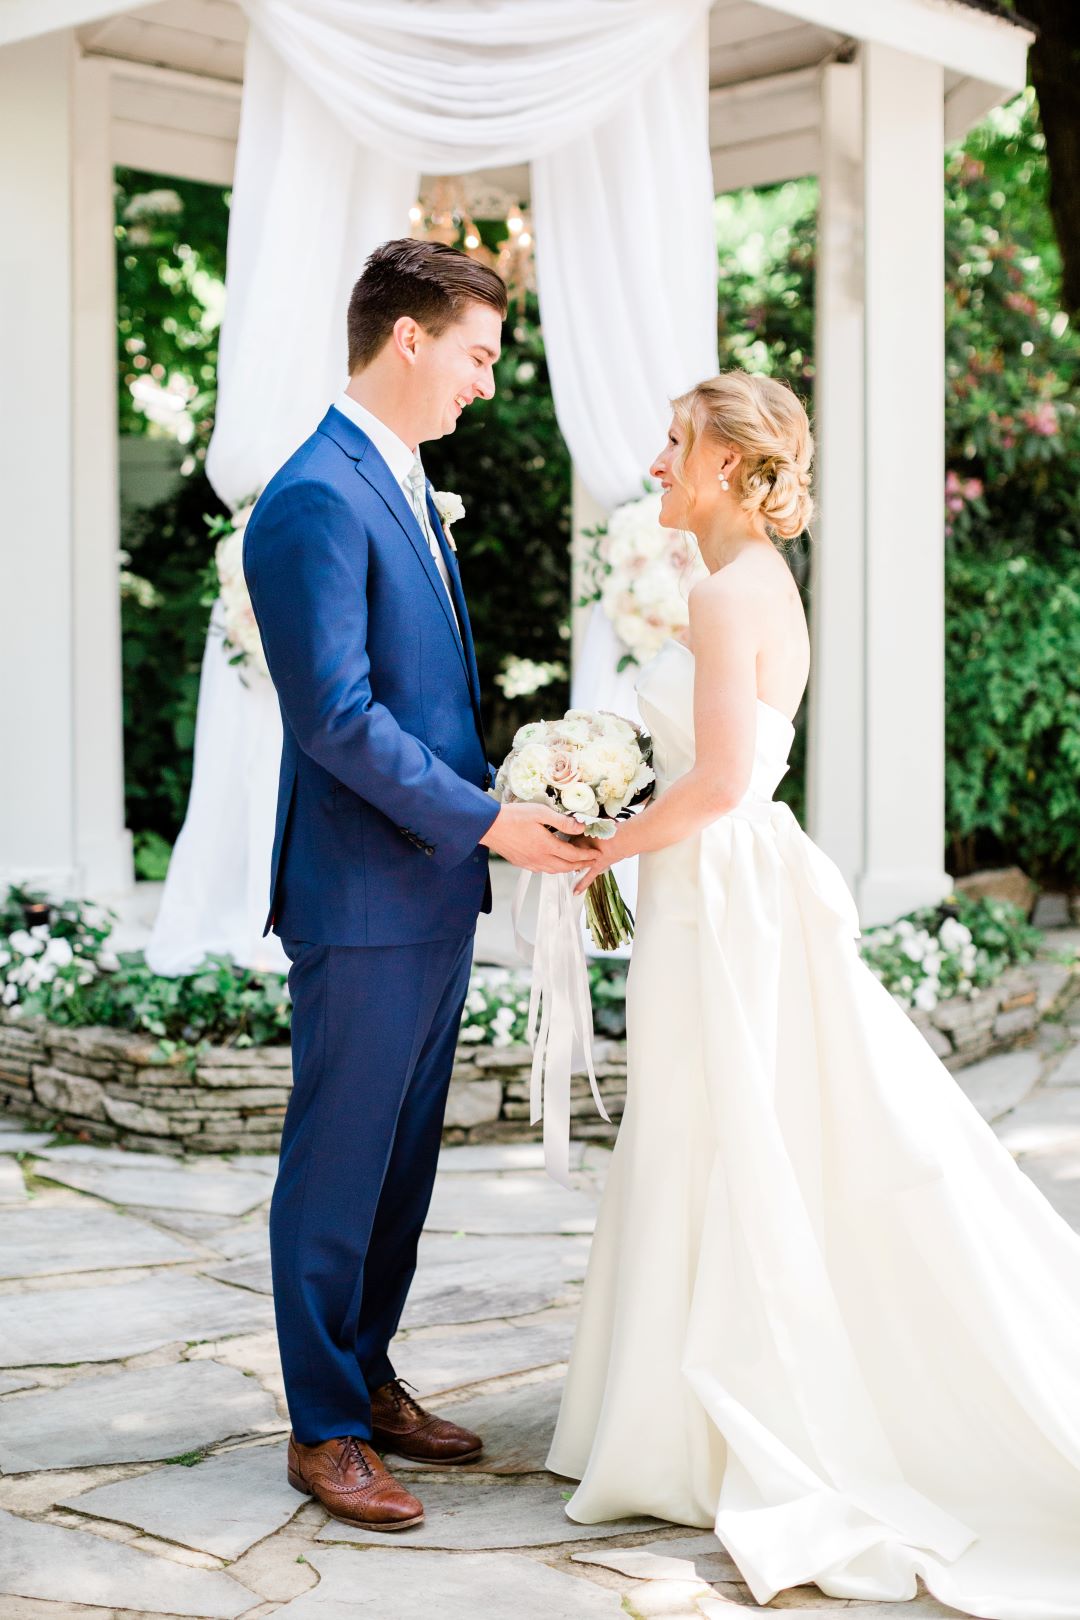 CJ's Off The Square | Bride and groom holding hands in the garden during their first look